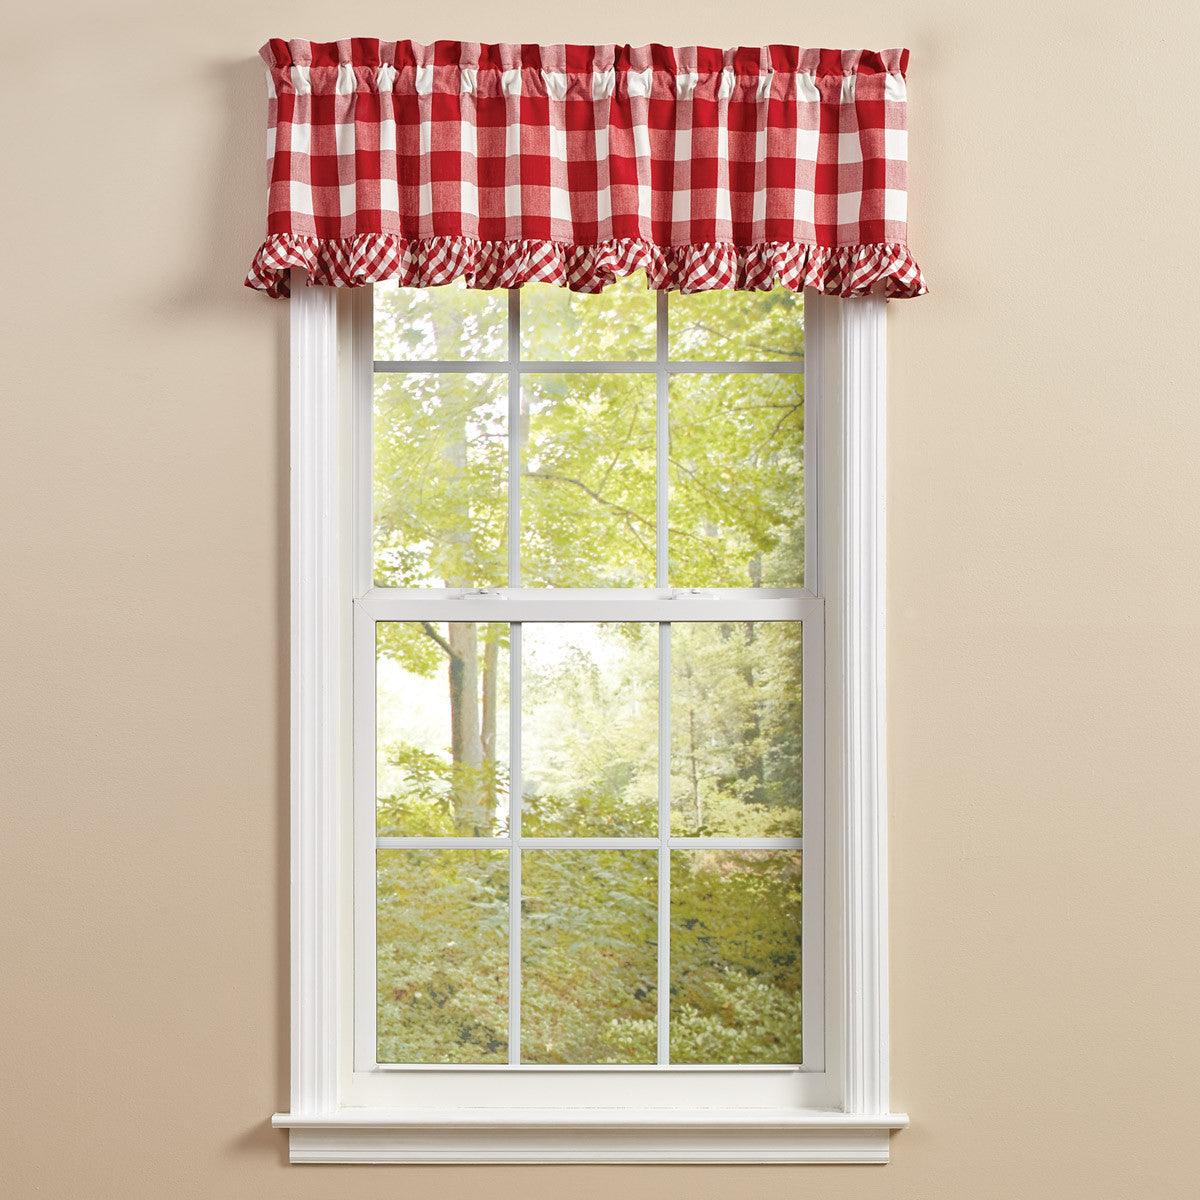 Wicklow Ruffled Valance 14" L - Red Park designs - The Fox Decor